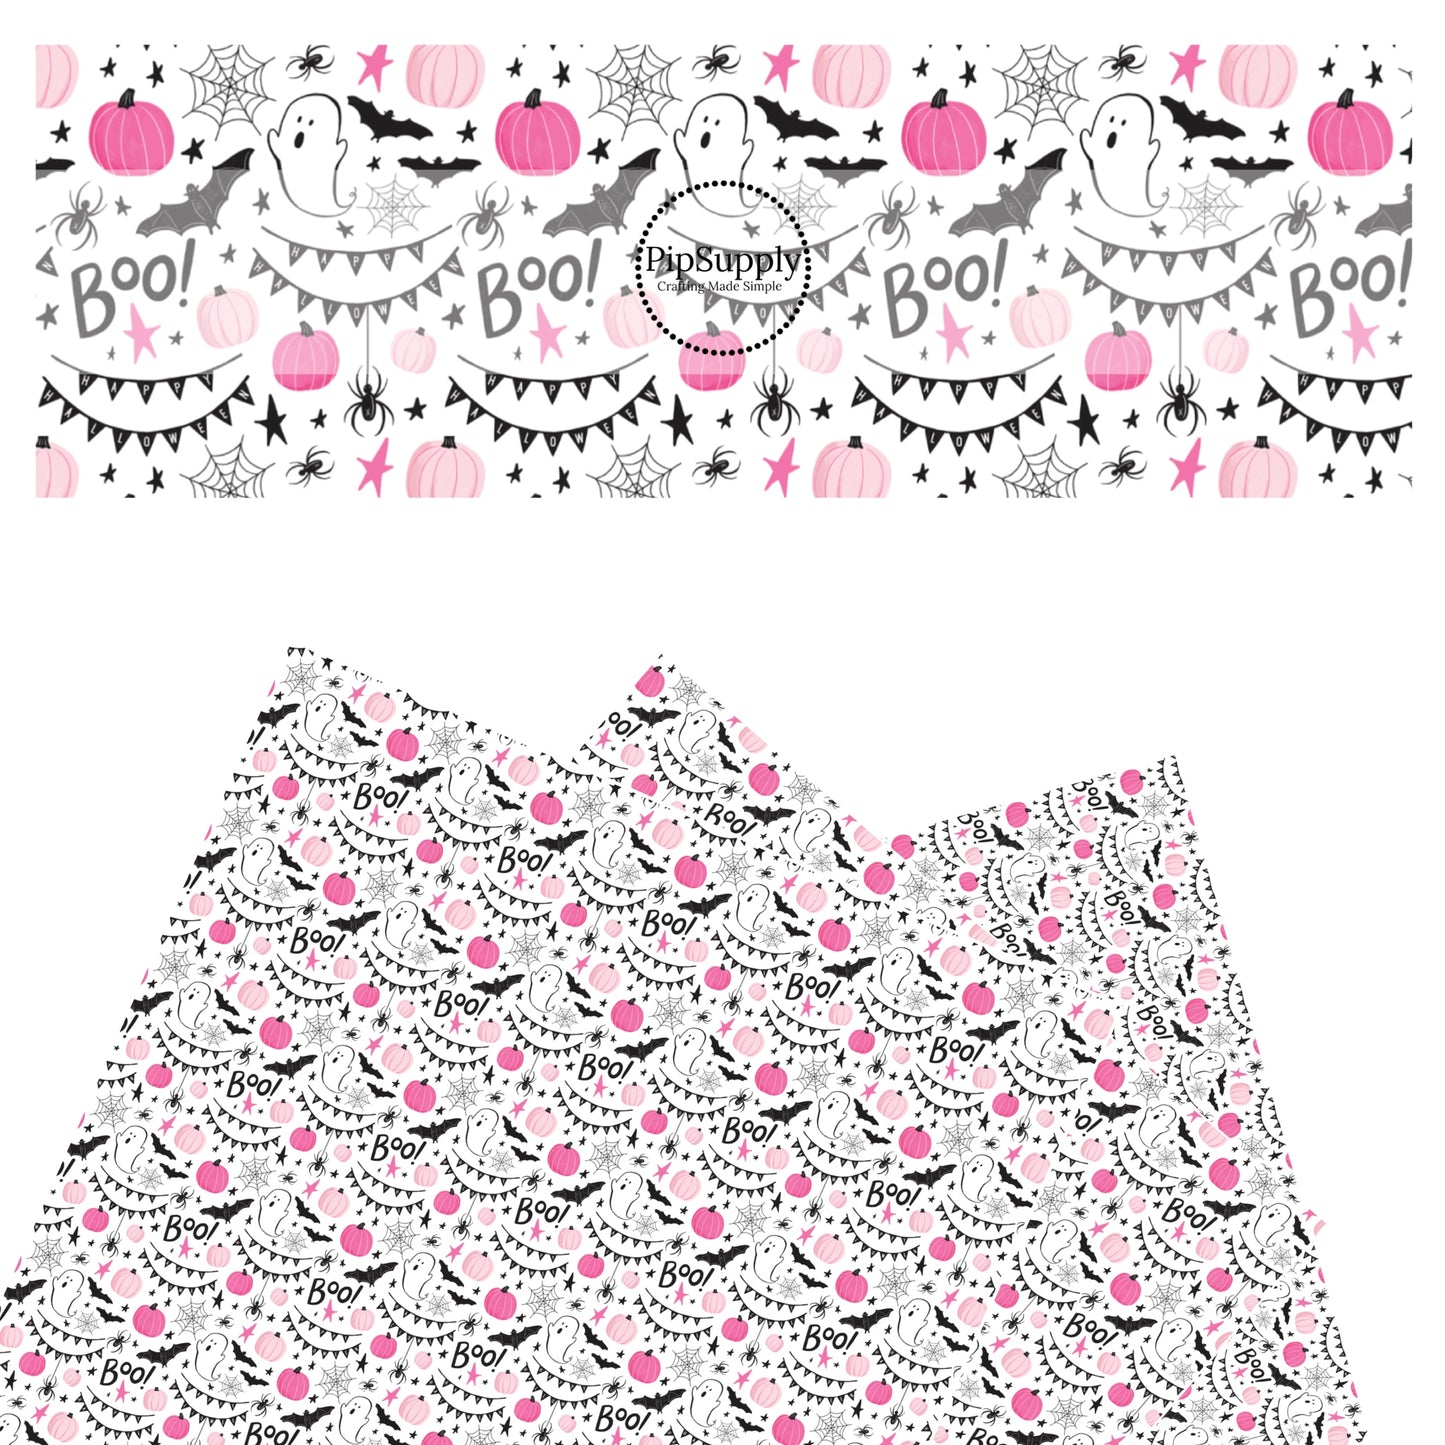 Pink pumpkins, ghost, spiders, bats, stars, and halloween banners on white faux leather sheets